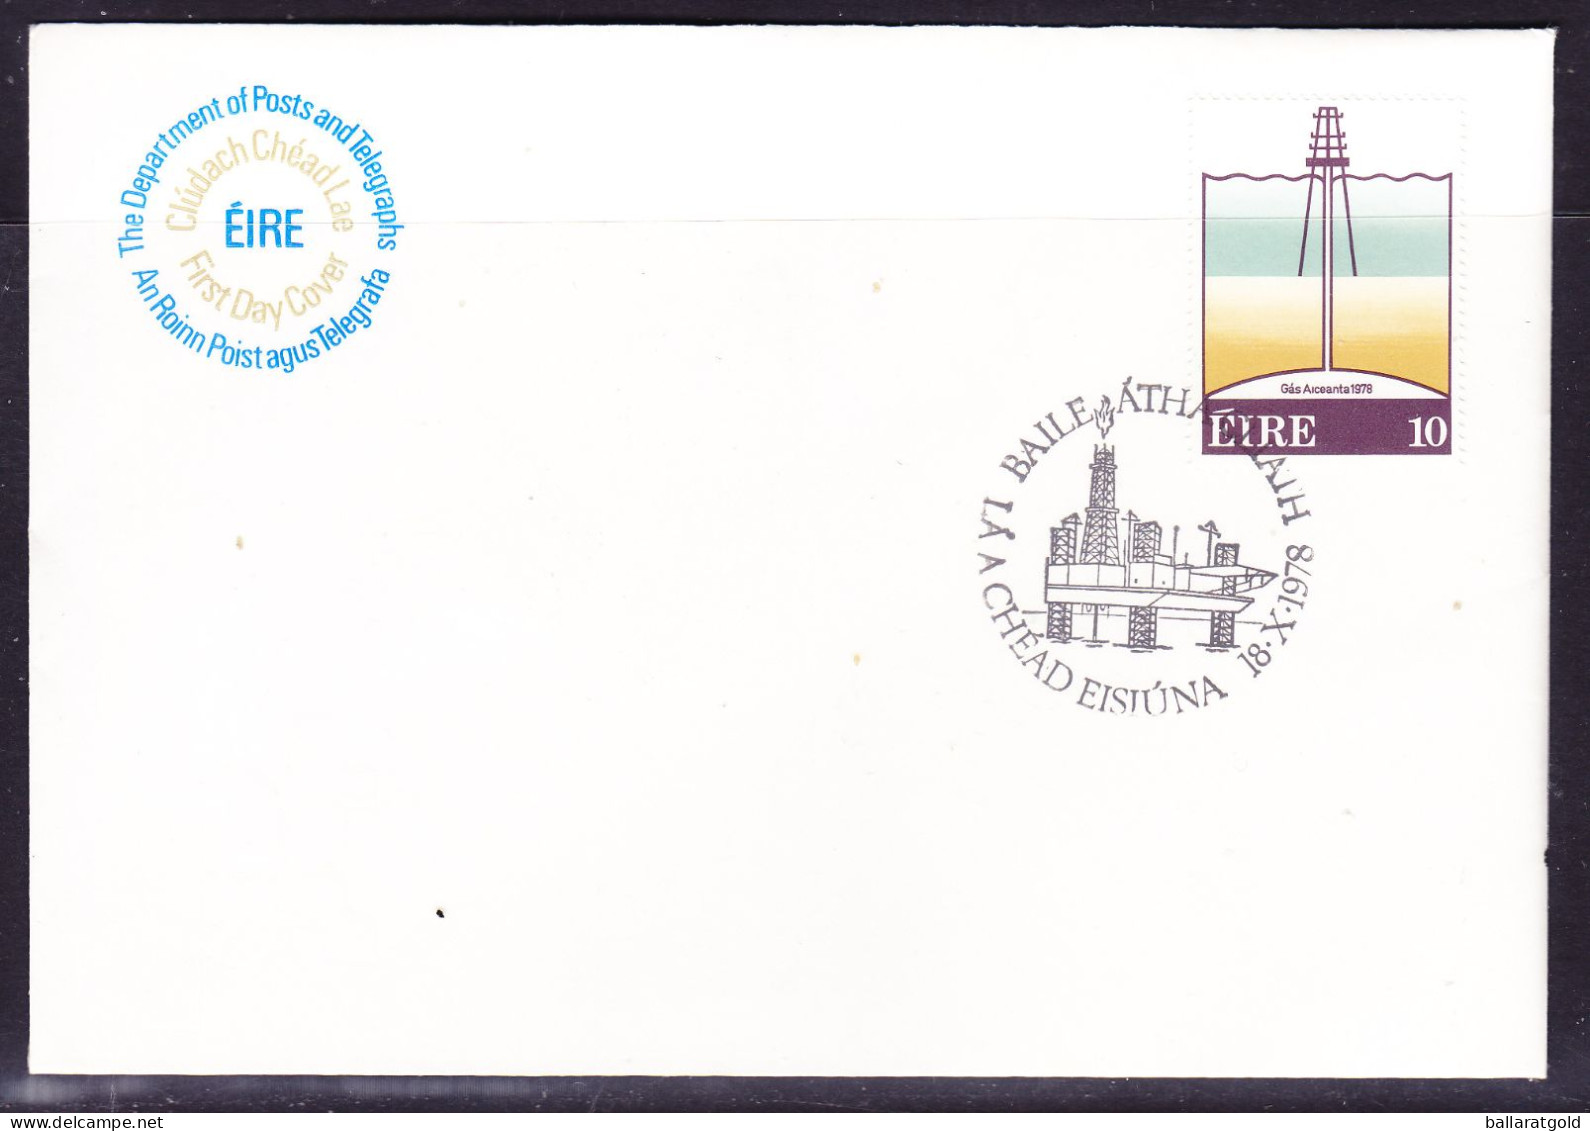 Ireland 1978 Offshore Oil First Day Cover - Unaddressed - Covers & Documents